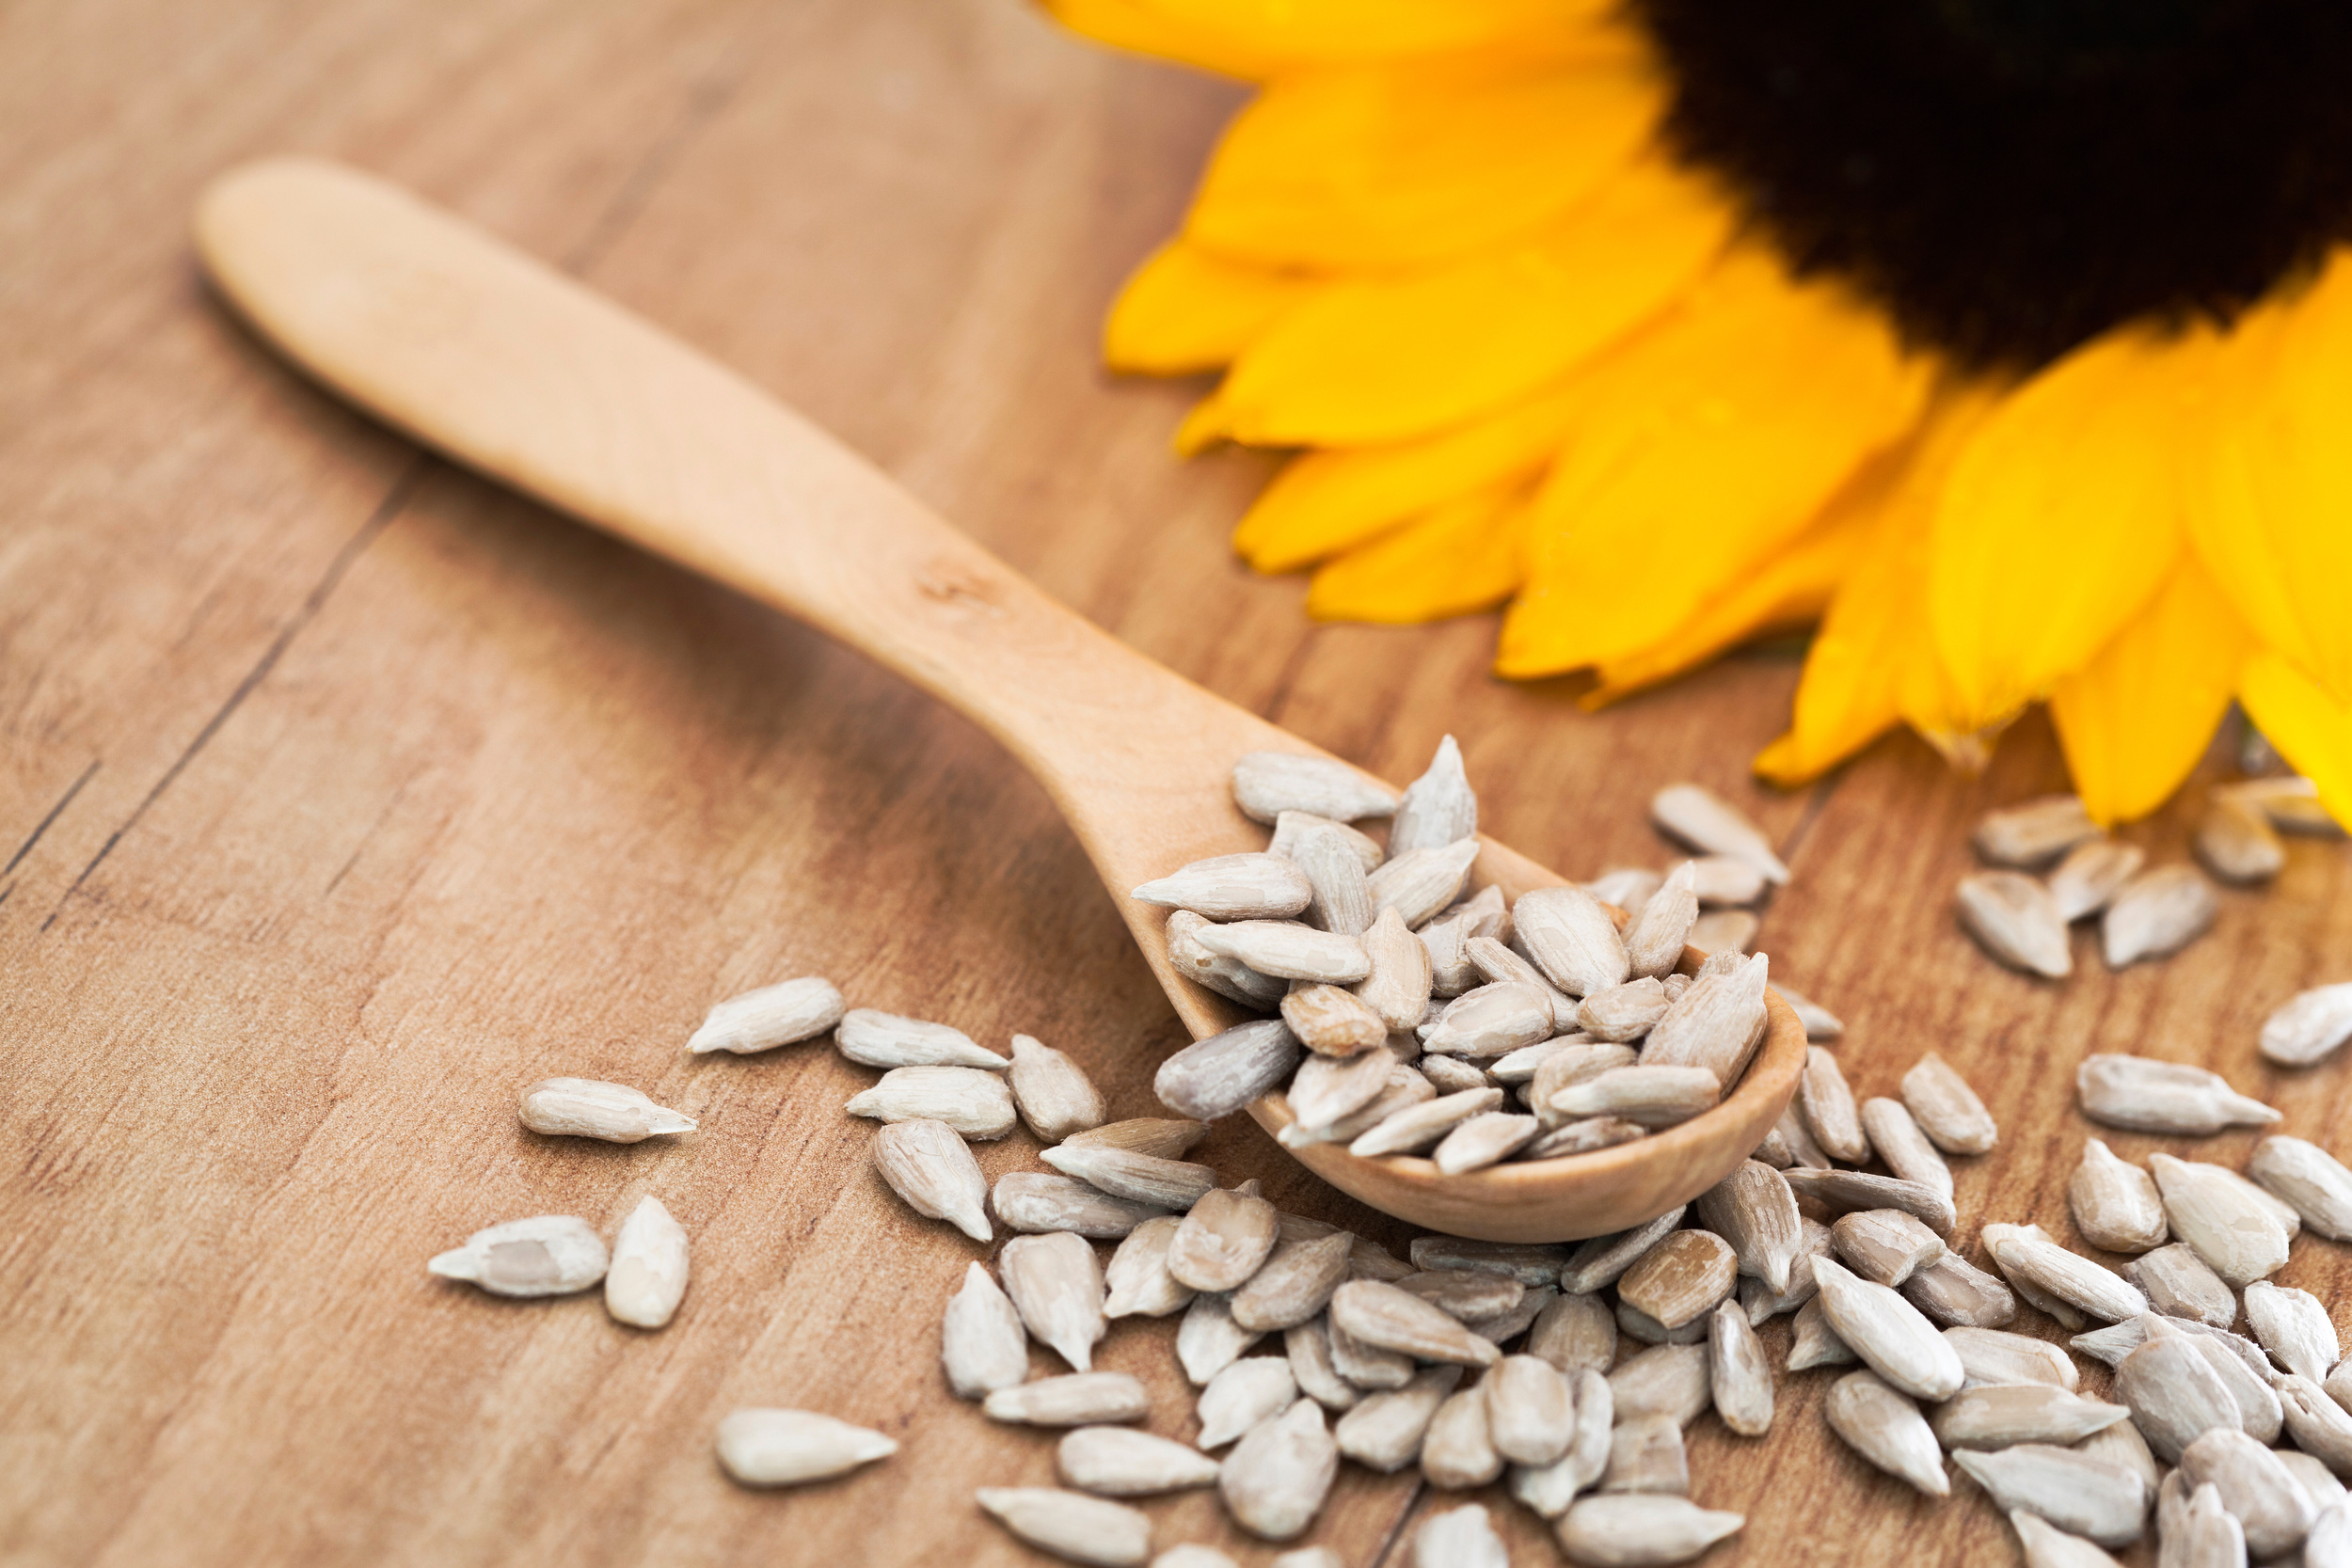 <p>Sunflower seeds may be tiny, but they’re mighty in both taste and benefits. These salty little seeds contain vitamin E, flavonoids, and other compounds that may reduce inflammation, and they’re also a sneaky source of protein (6 grams per ¼ cup) and fiber (4 grams per ¼ cup).</p><p><a href='https://www.msn.com/en-us/community/channel/vid-cj9pqbr0vn9in2b6ddcd8sfgpfq6x6utp44fssrv6mc2gtybw0us'>Follow us on MSN to see more of our exclusive lifestyle content.</a></p>